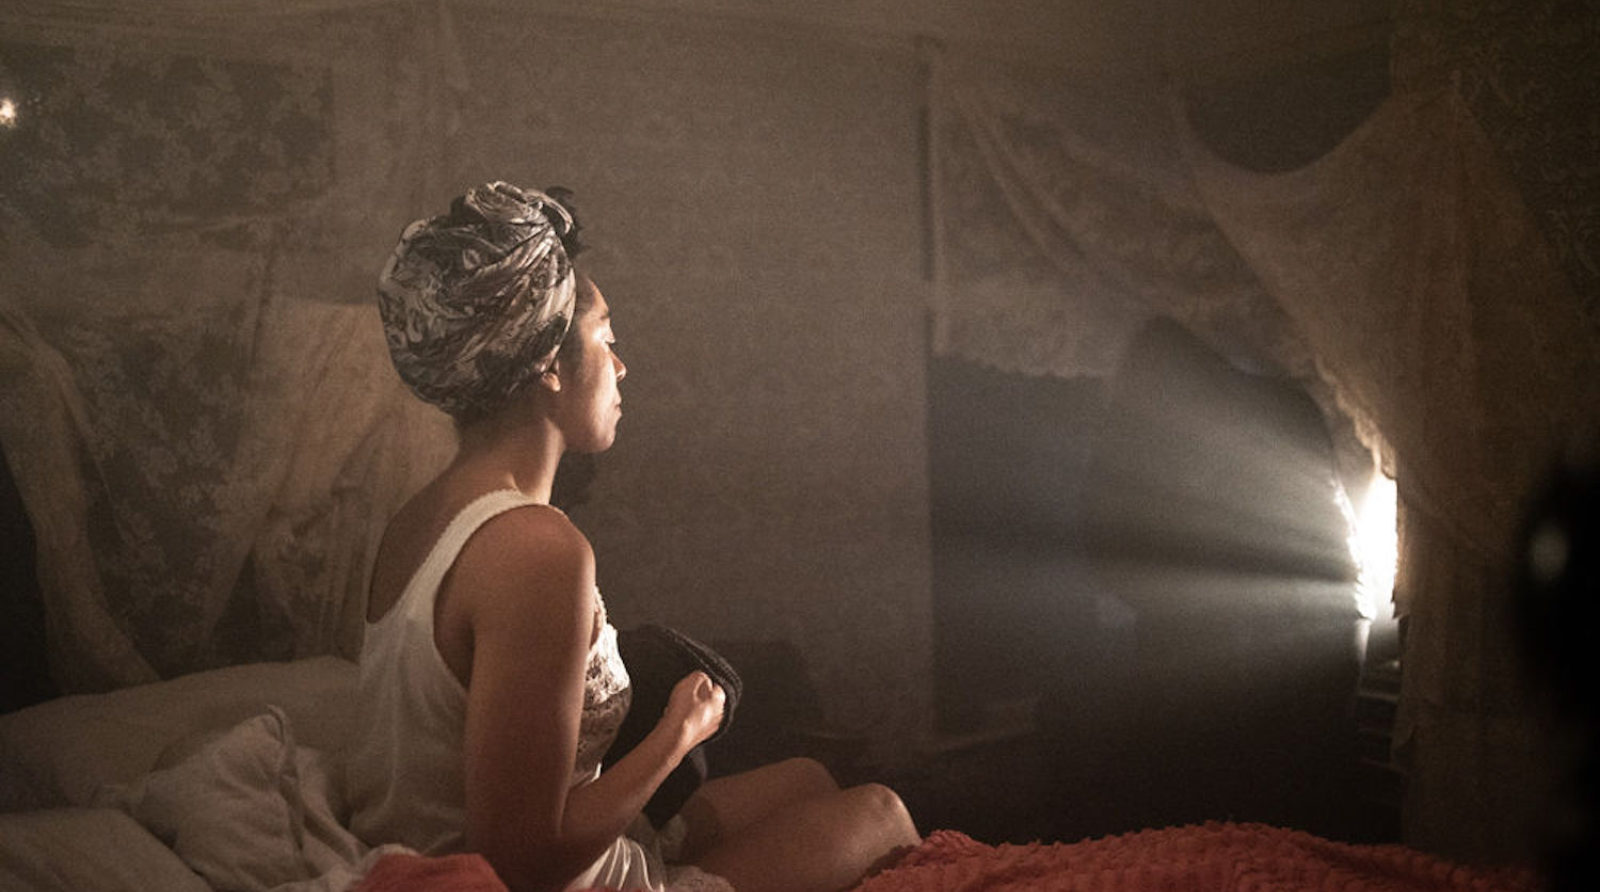 A woman wearing a nightdress and a hair wrap is sitting on the edge of a dishevelled bed. She is looking off camera towards a patch of light in the corner of the room. The room is dark and the light shines on her face.